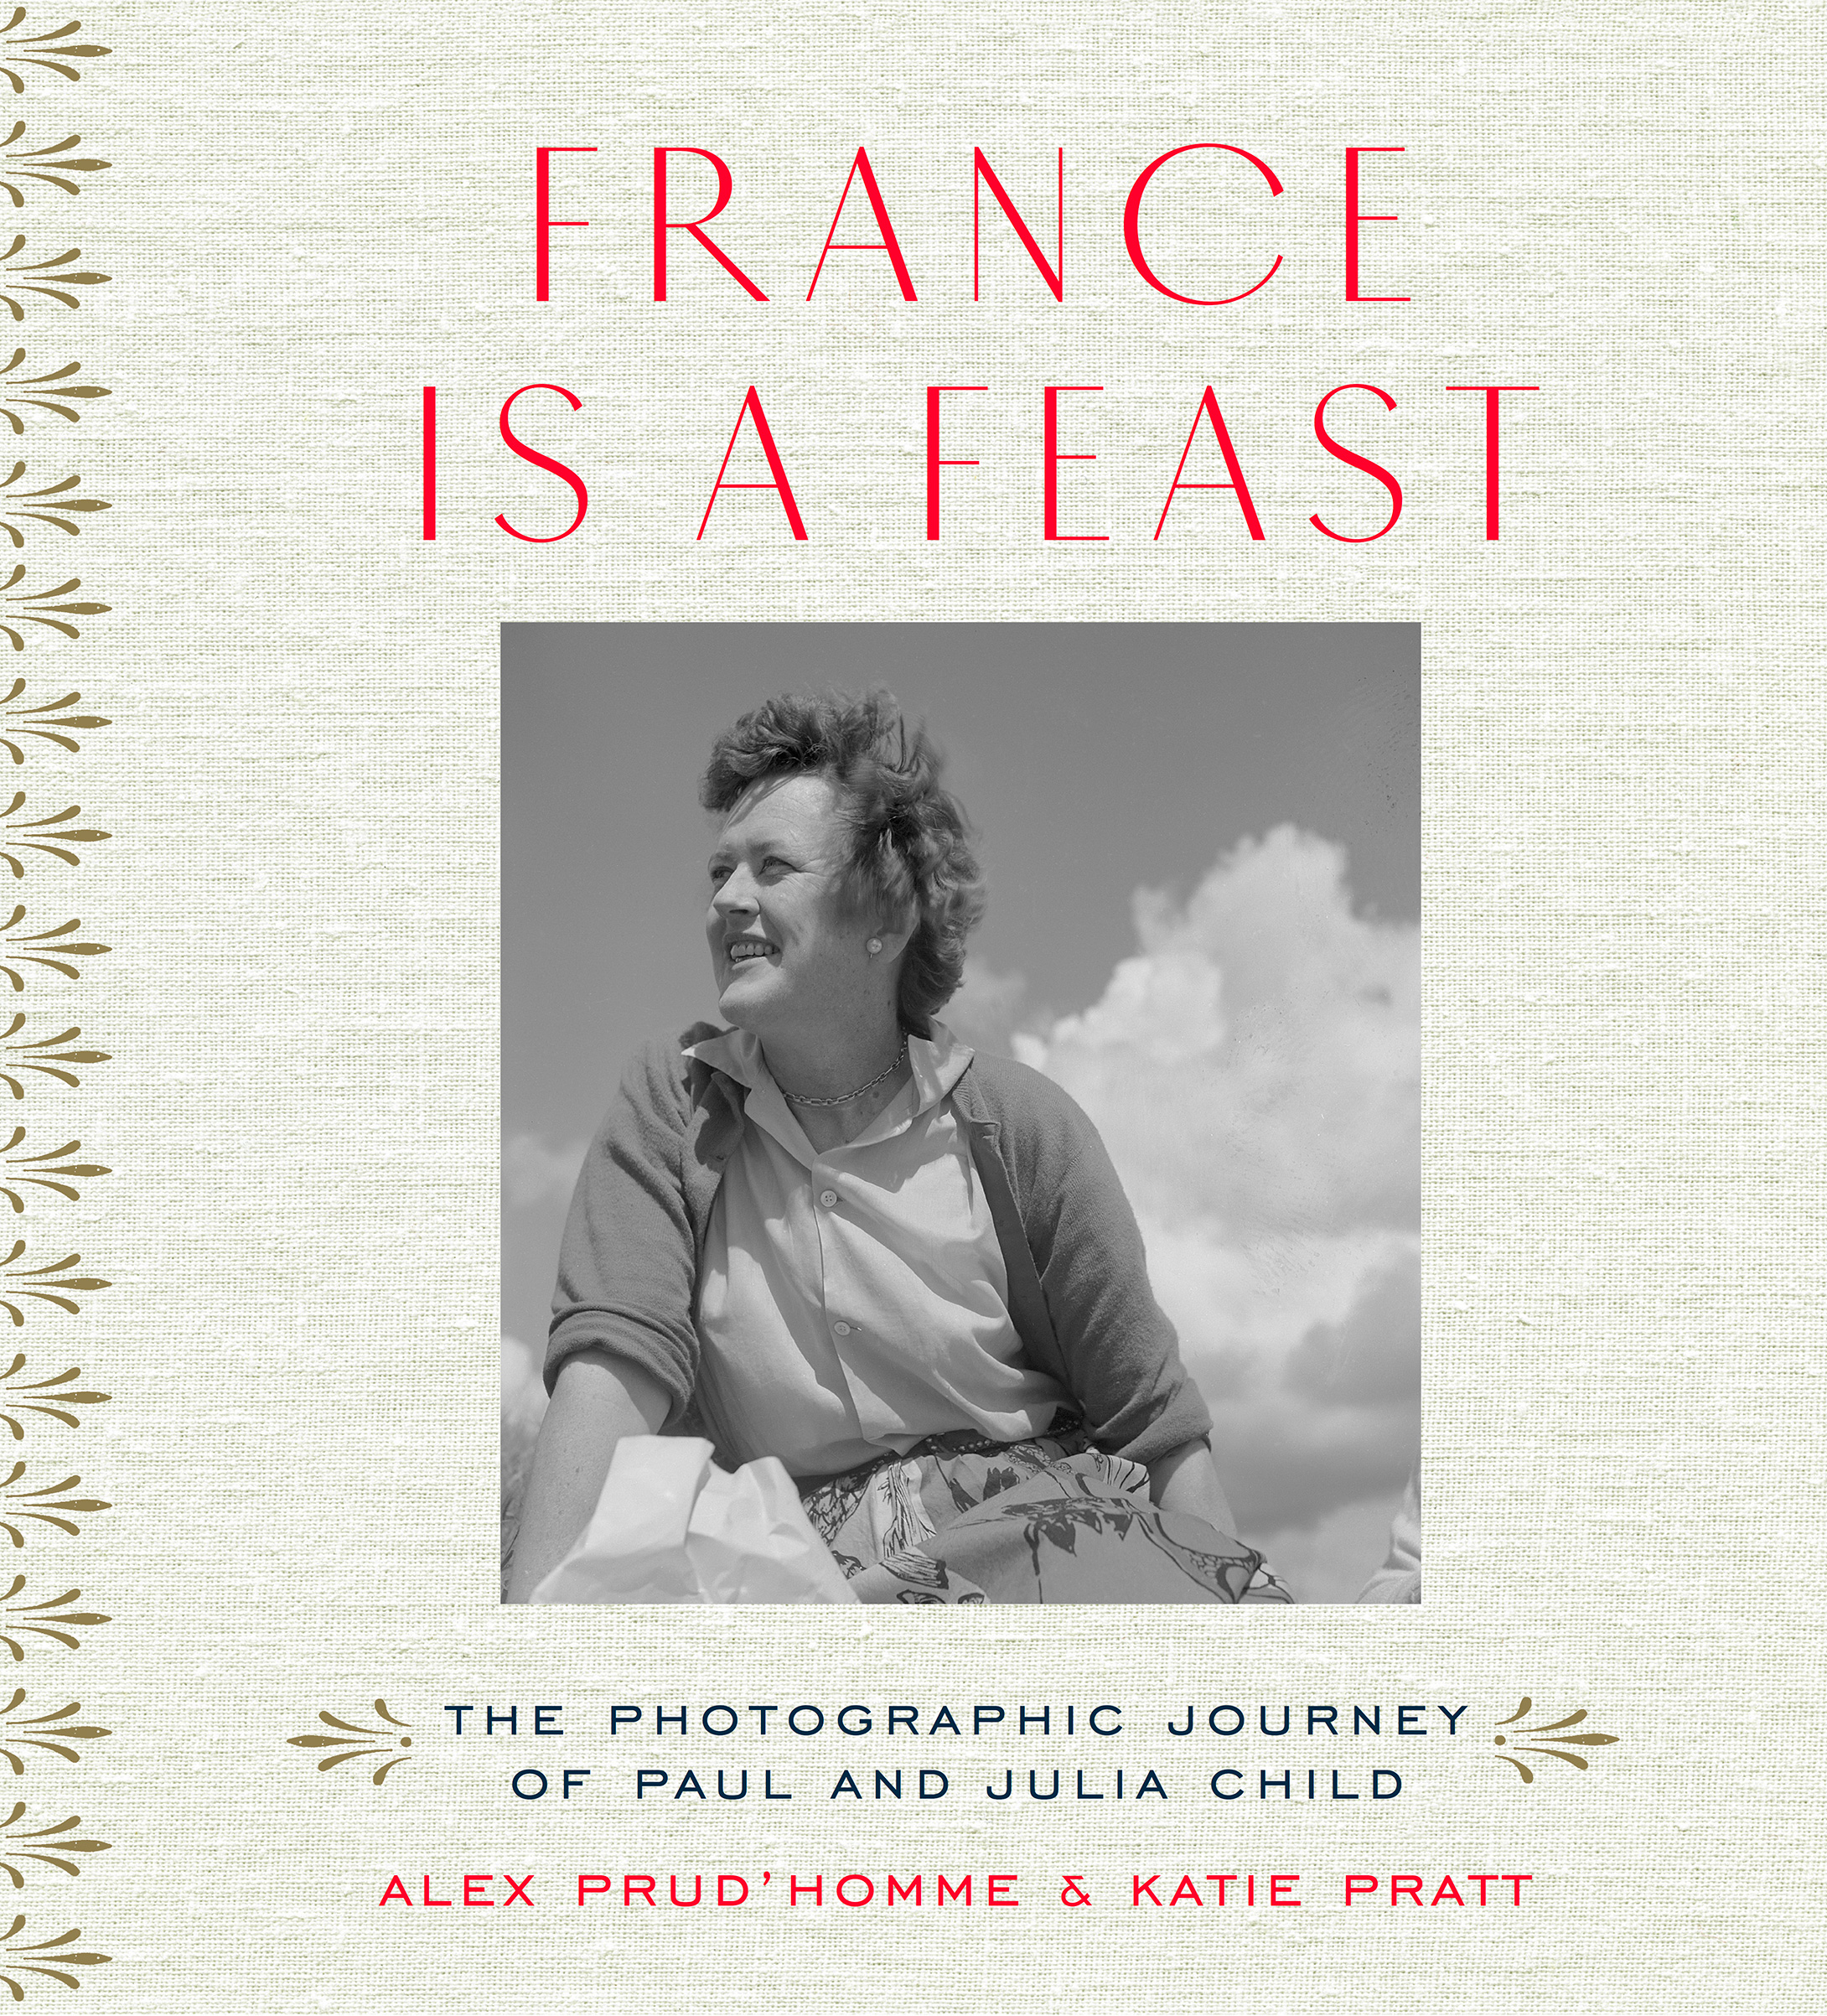 France Is A Feast: The Photographic Journey of Paul and Julia Child (Courtesy Thames & Hudson)